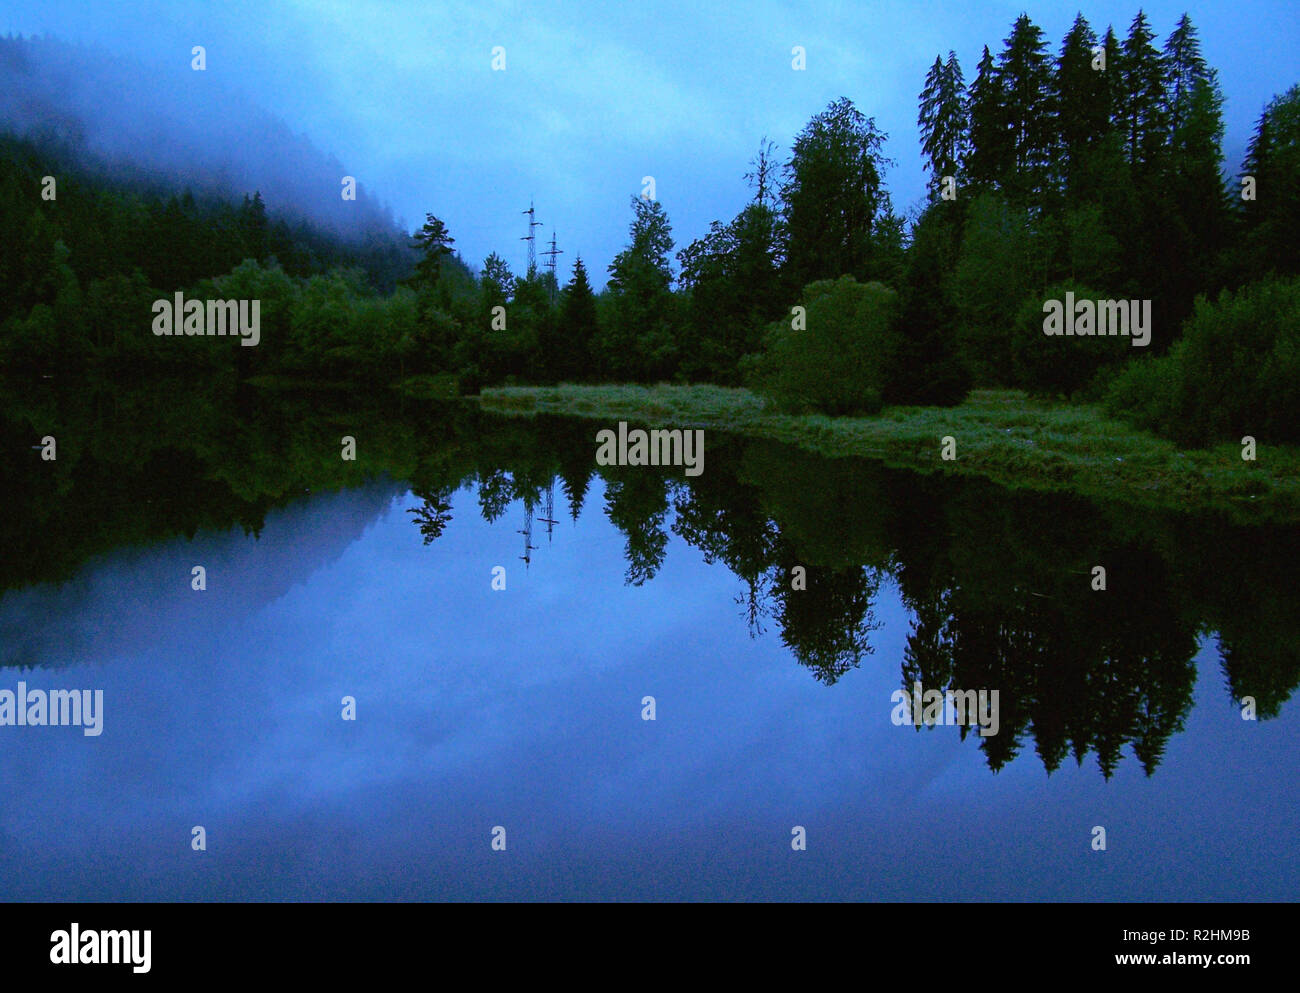 am Abend am See Stockfoto